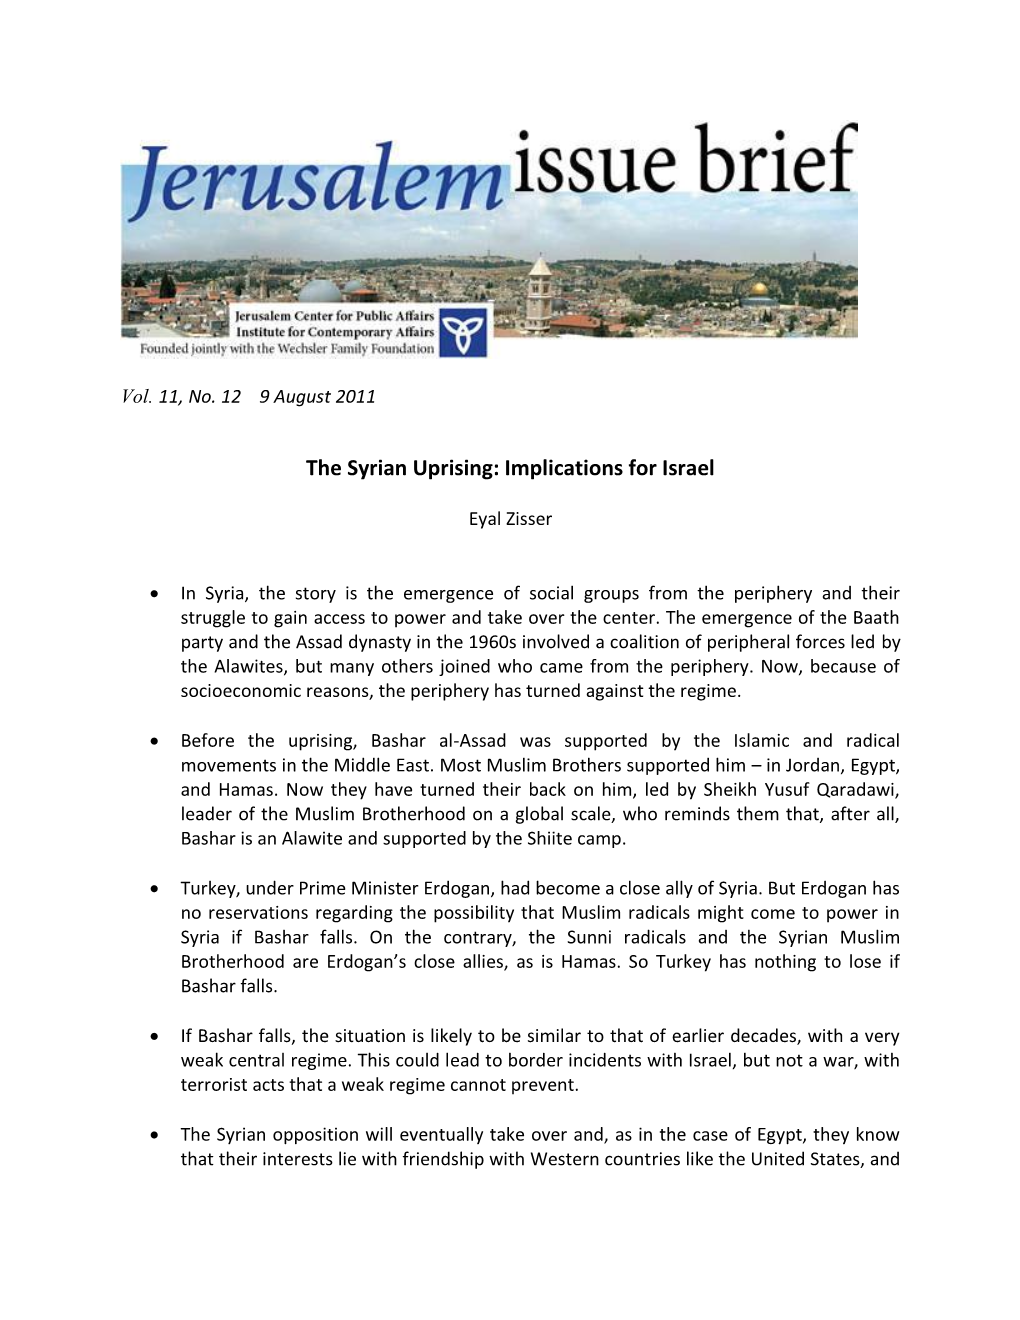 The Syria Uprising: Implications for Israel